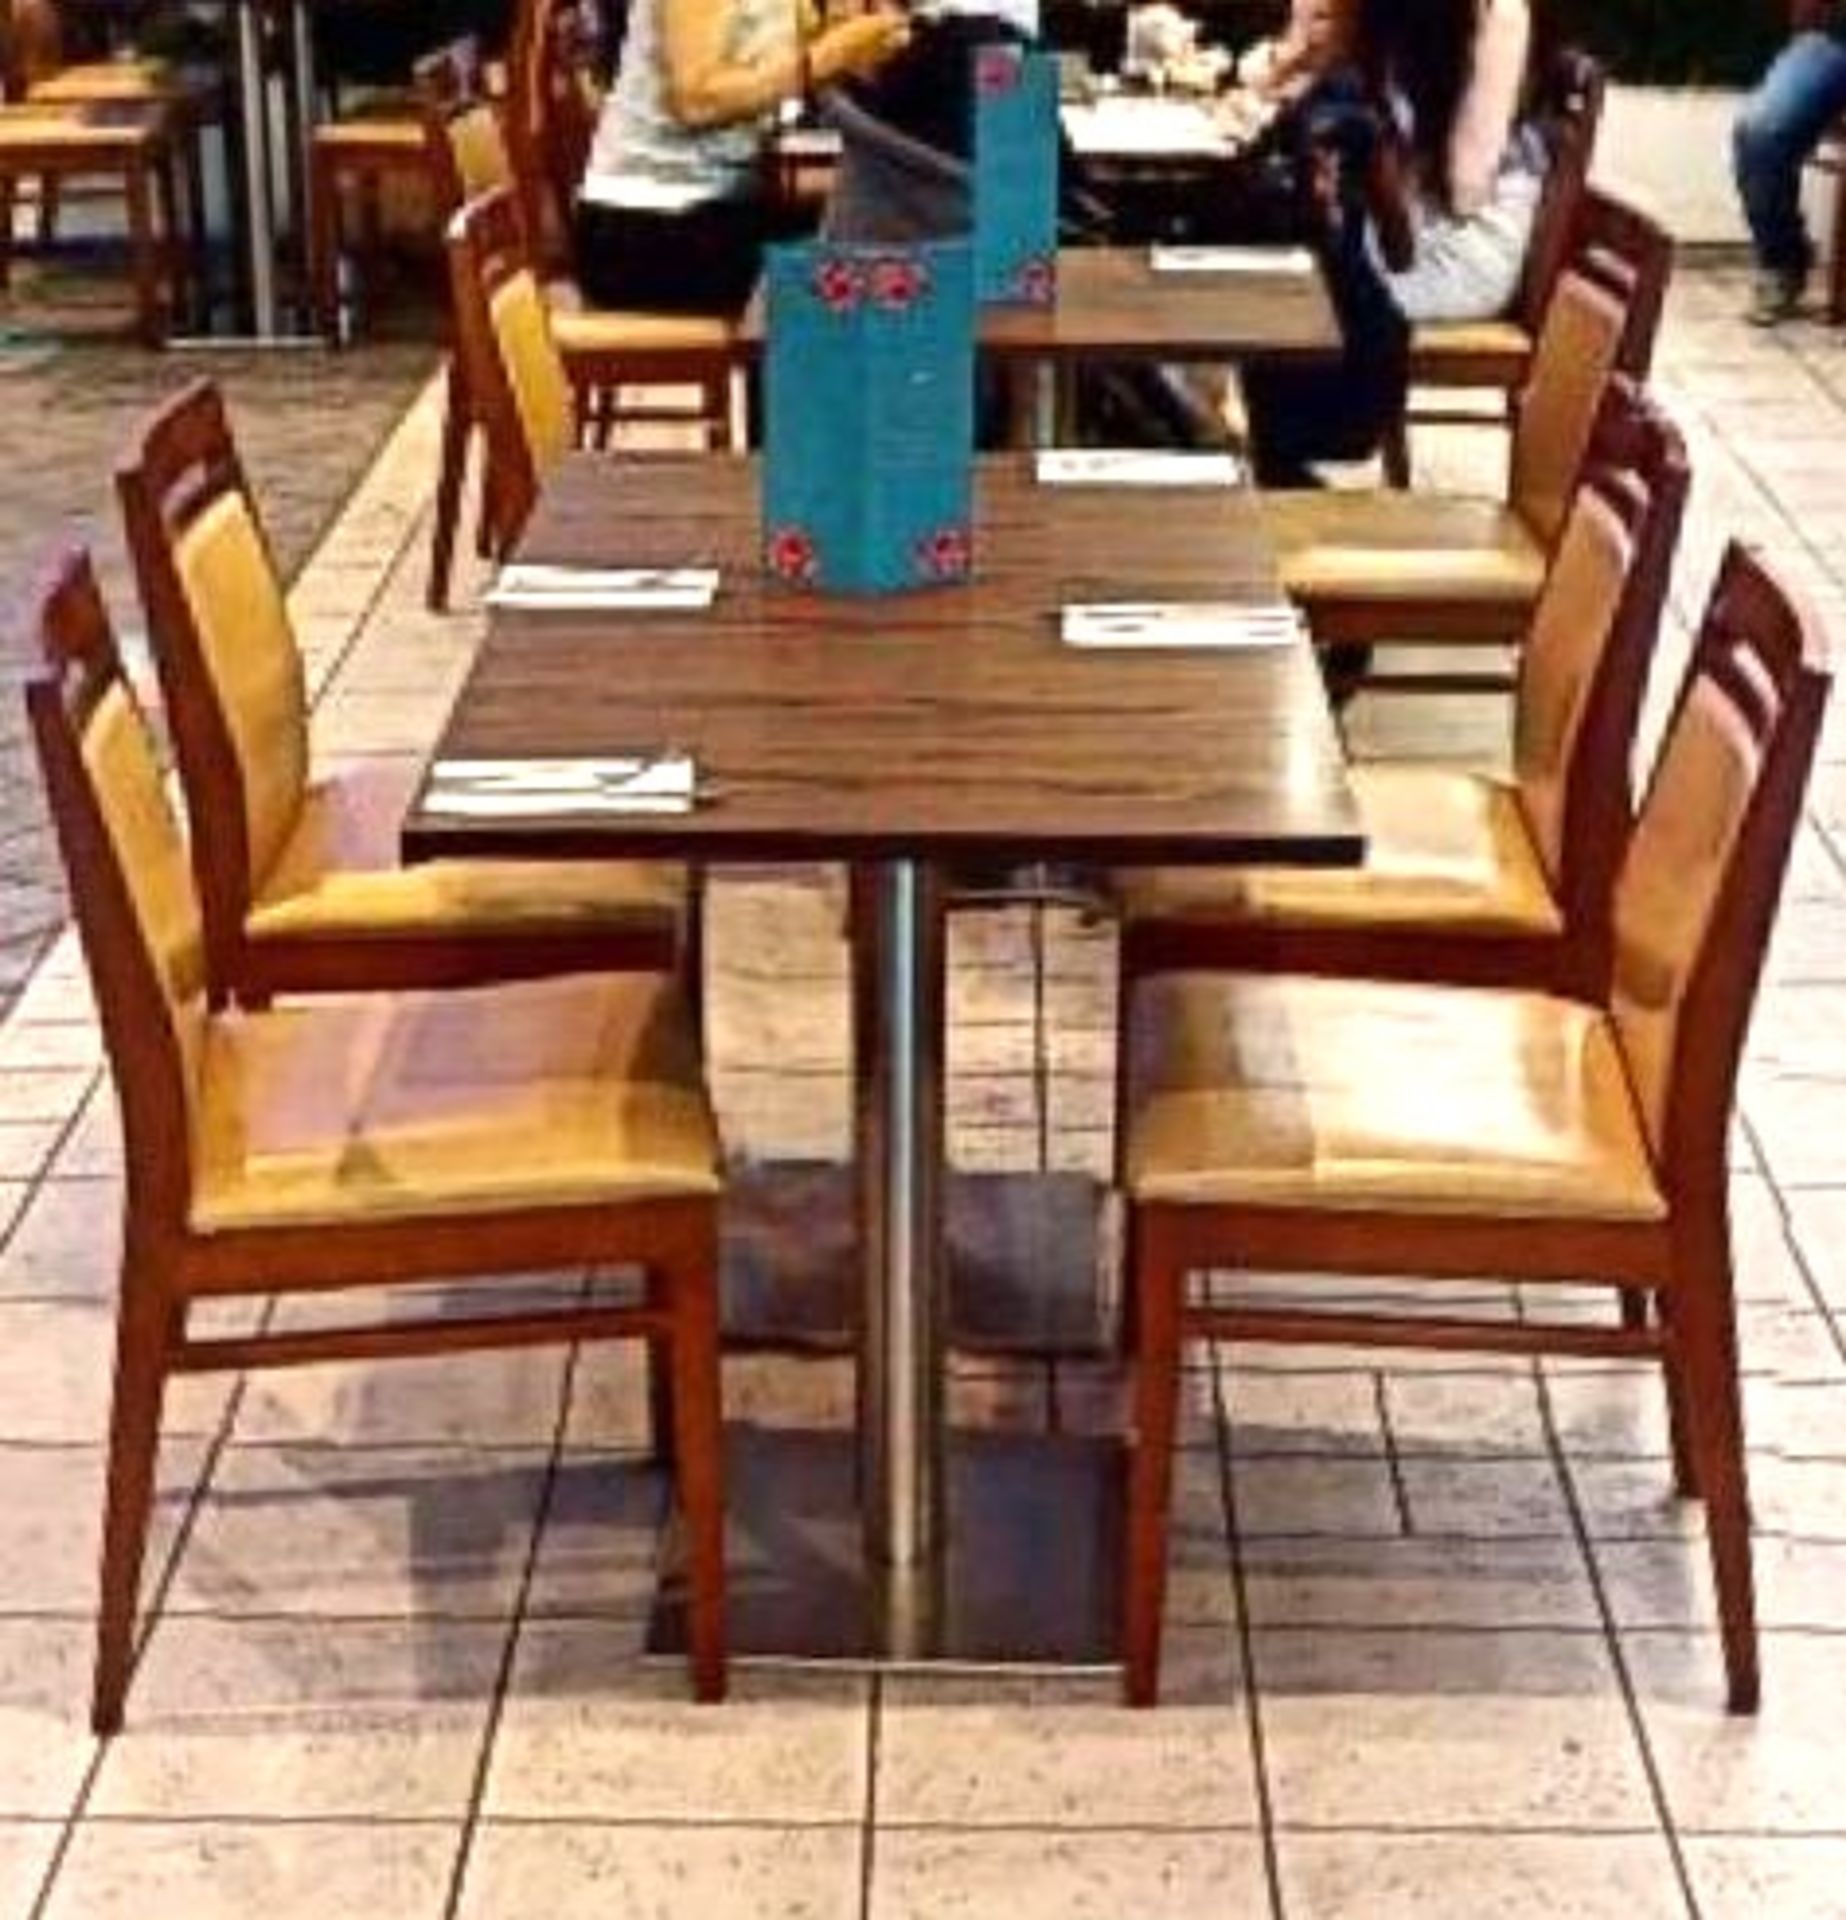 16 x High Quality Restaurant Chairs With Wooden Frames and Leather Seat Pads - Image 3 of 4